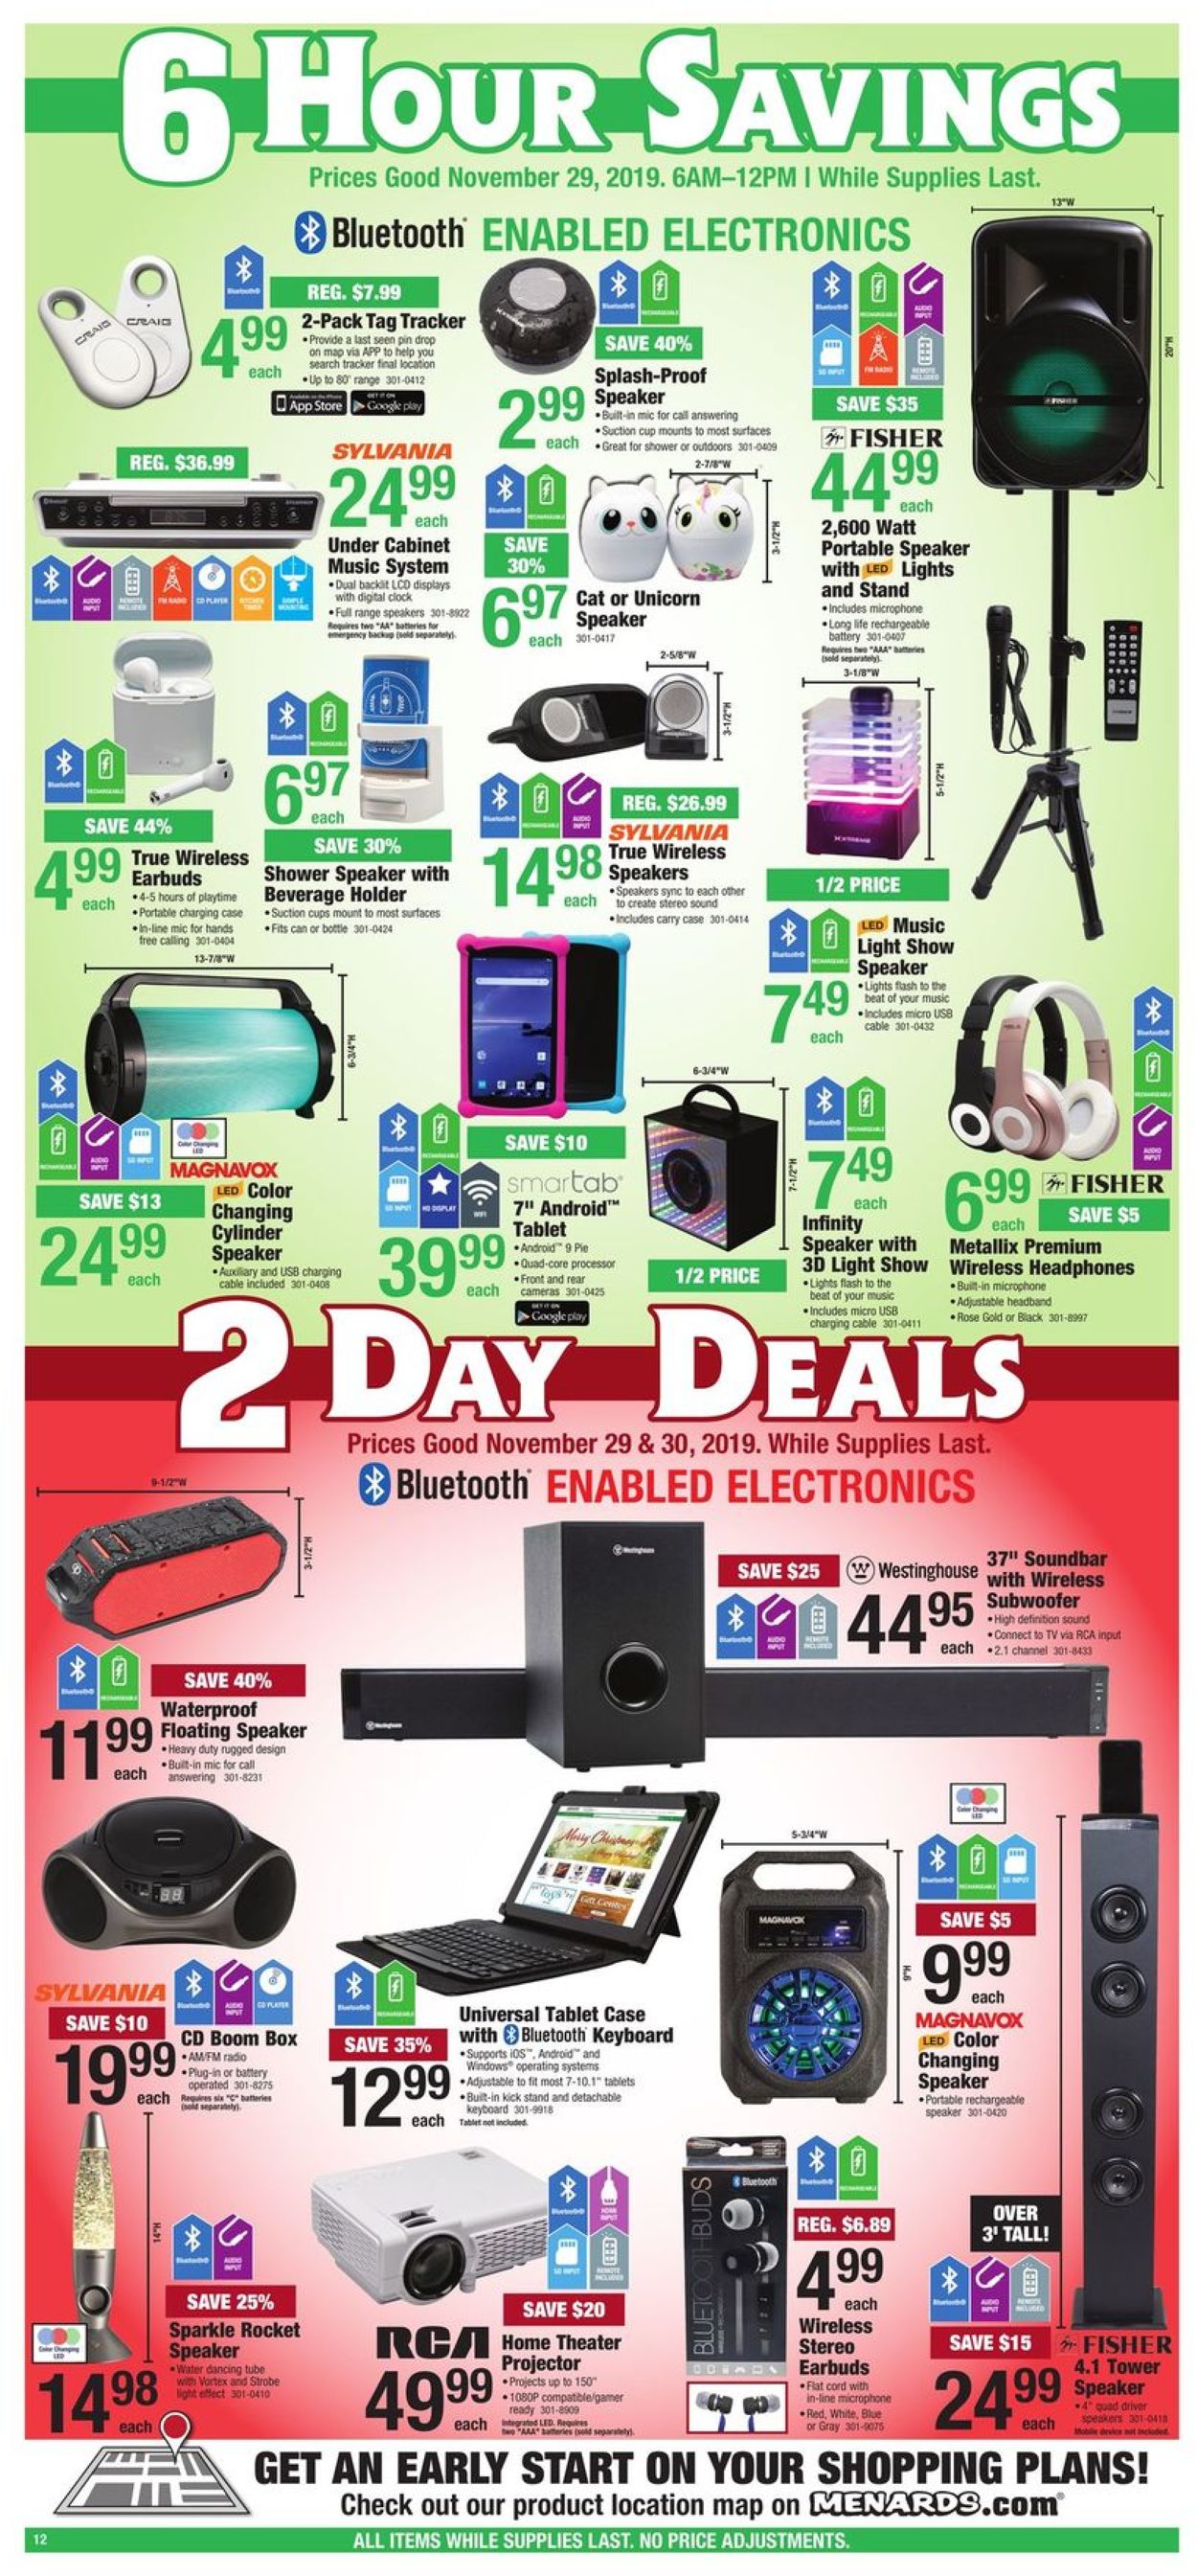 Menards - Black Friday Sale 2019 Current weekly ad 11/29 - 11/30/2019 [13] - 0